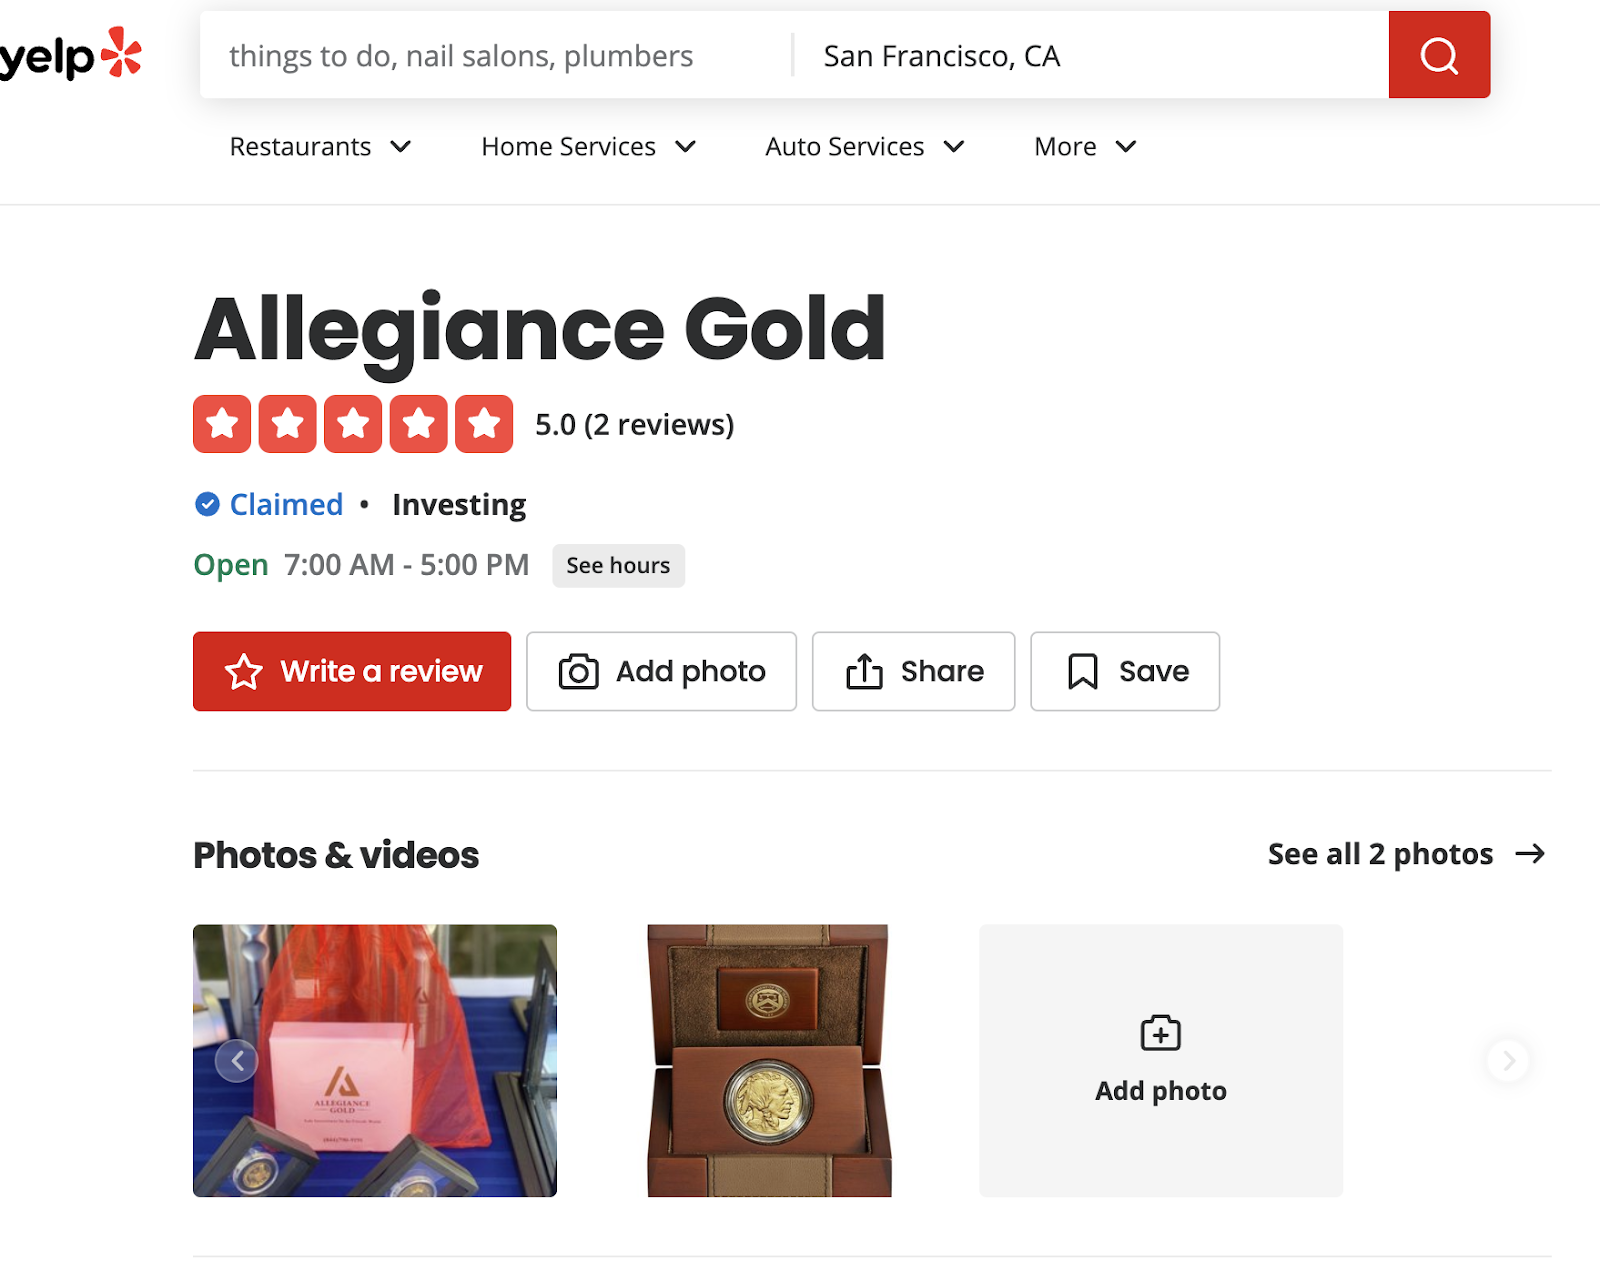 Allegiance Gold complaints on Yelp